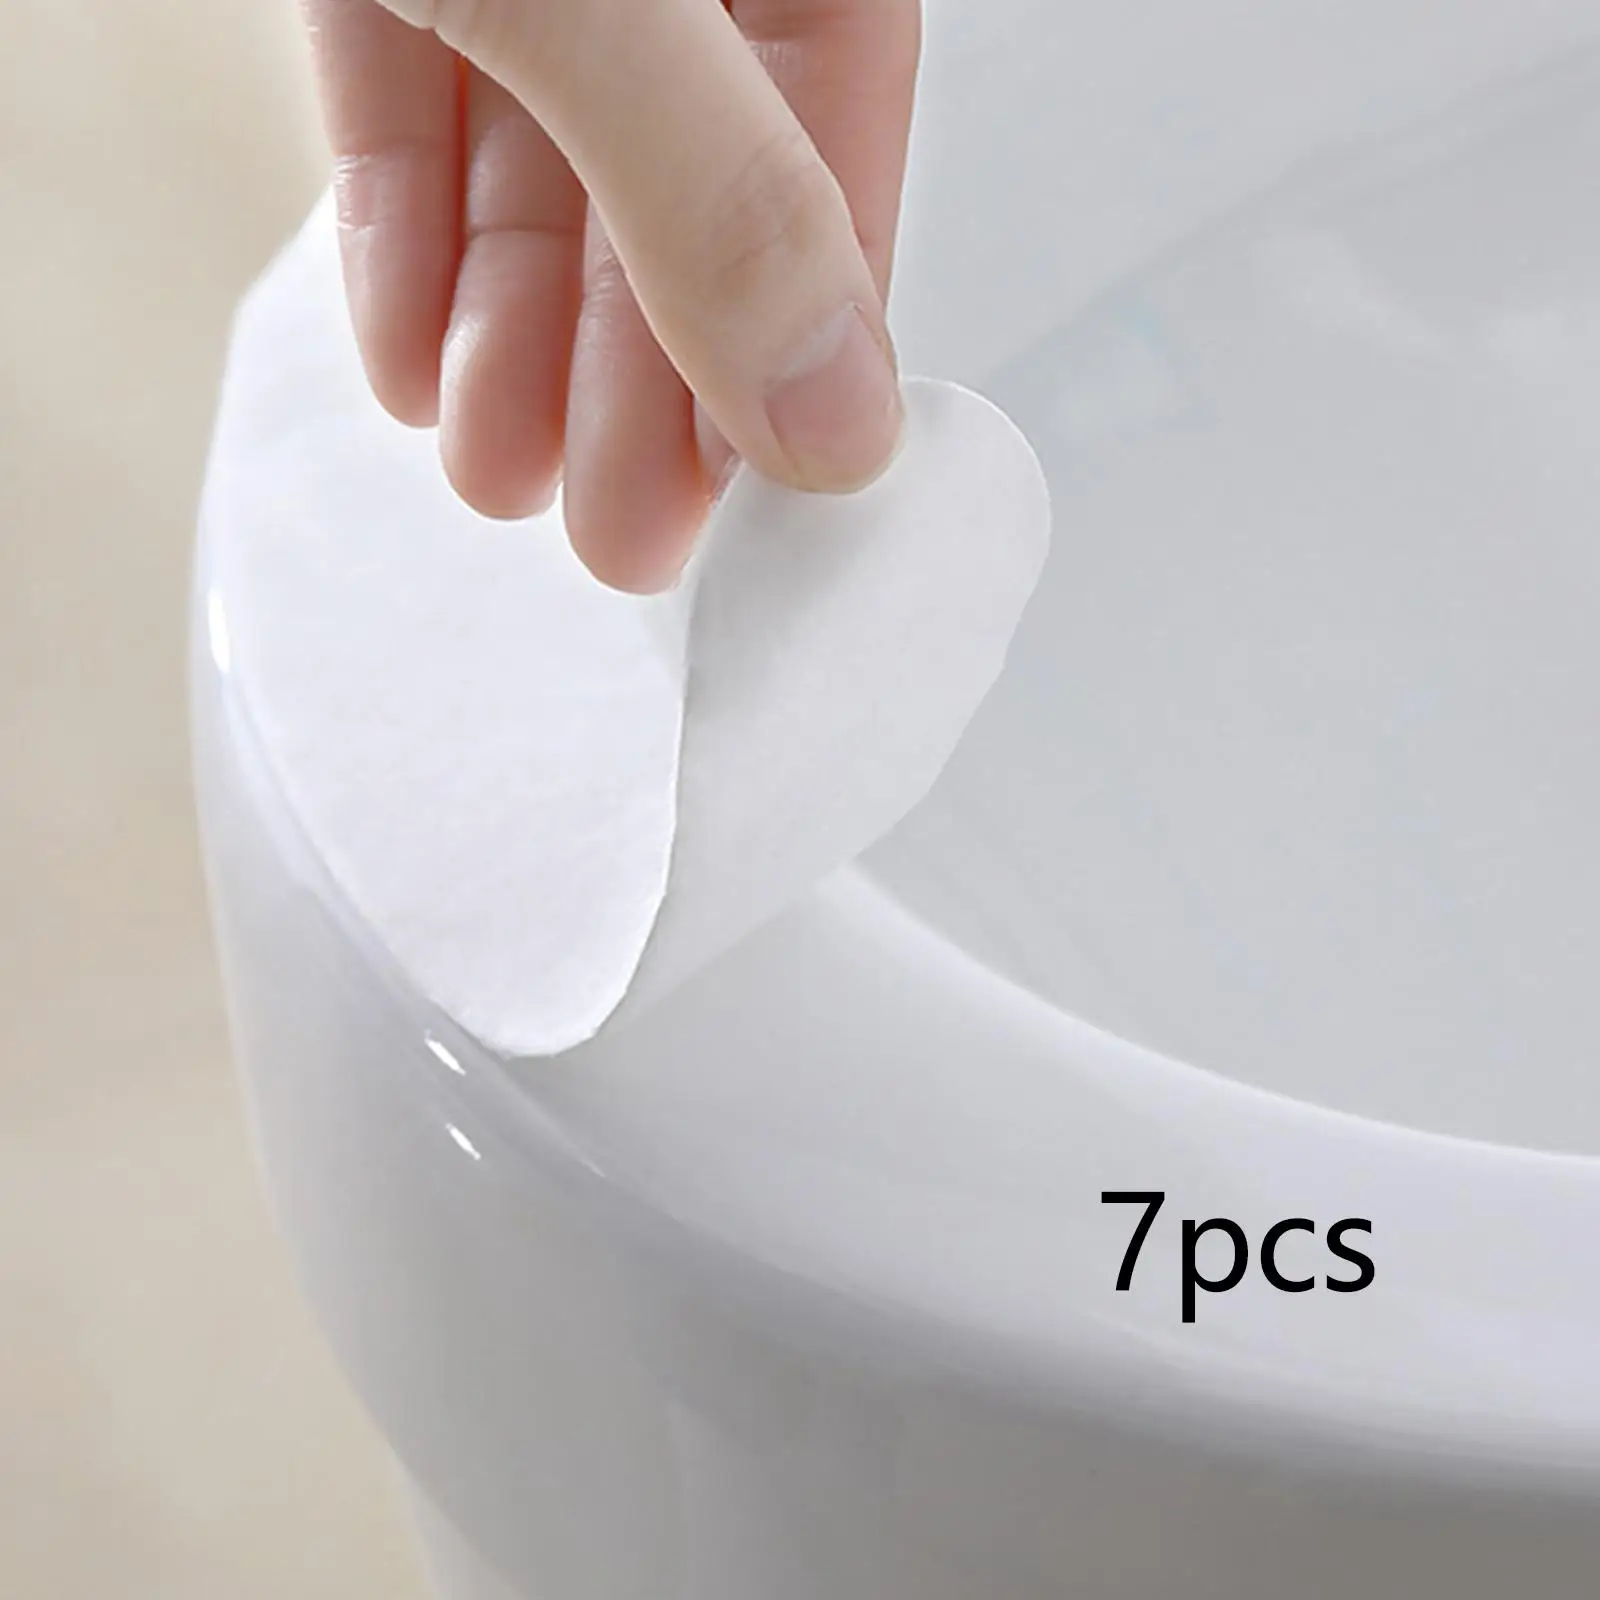 Toilet Pad Reusable to Prevent Urine Spatter Comfortable Toilet Pad Mute Pad Pad for Camping Toddler